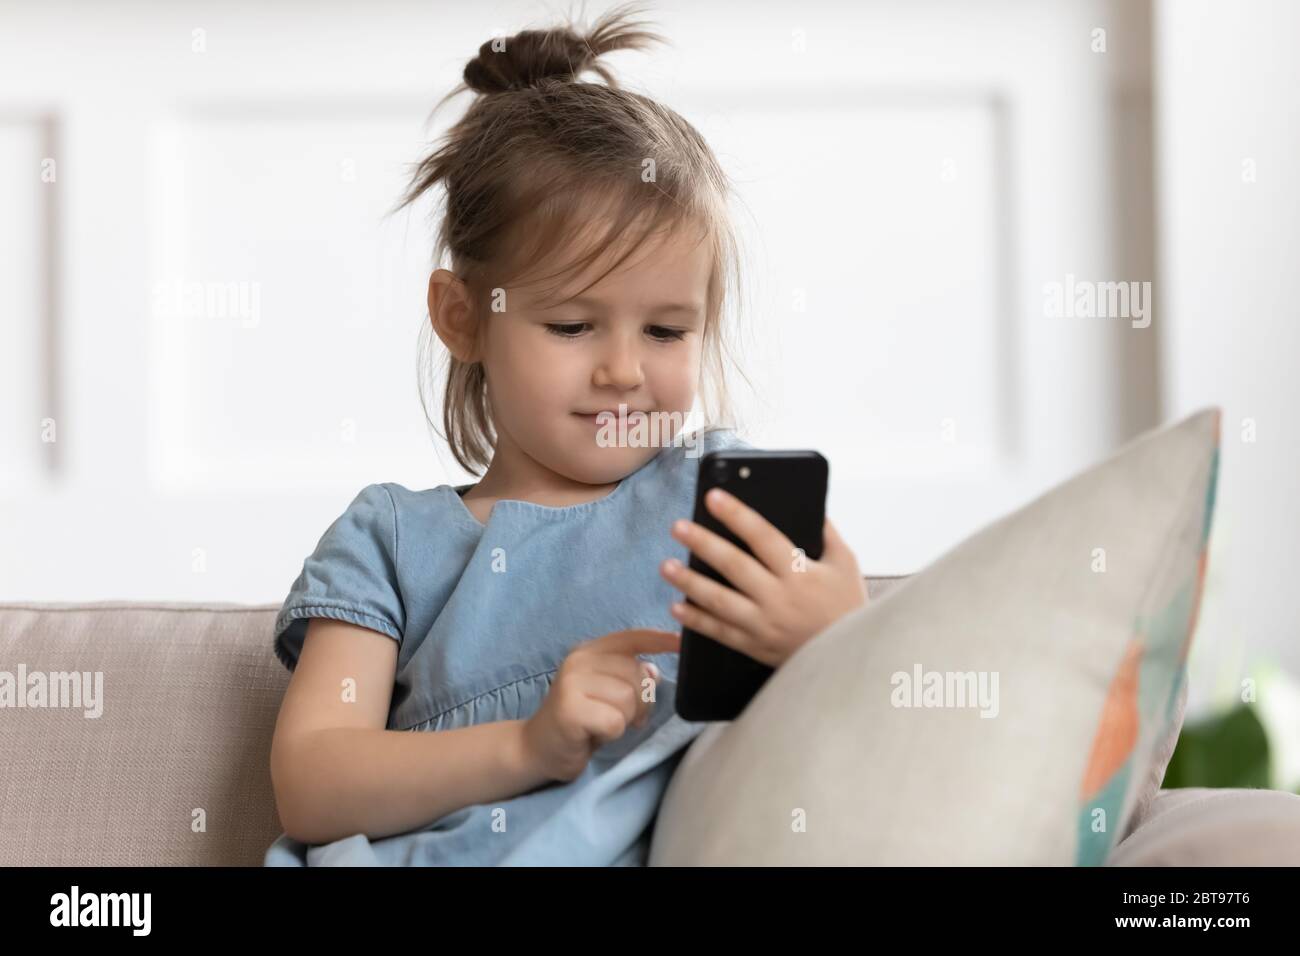 Close up cute little girl holding phone, looking at screen Stock Photo